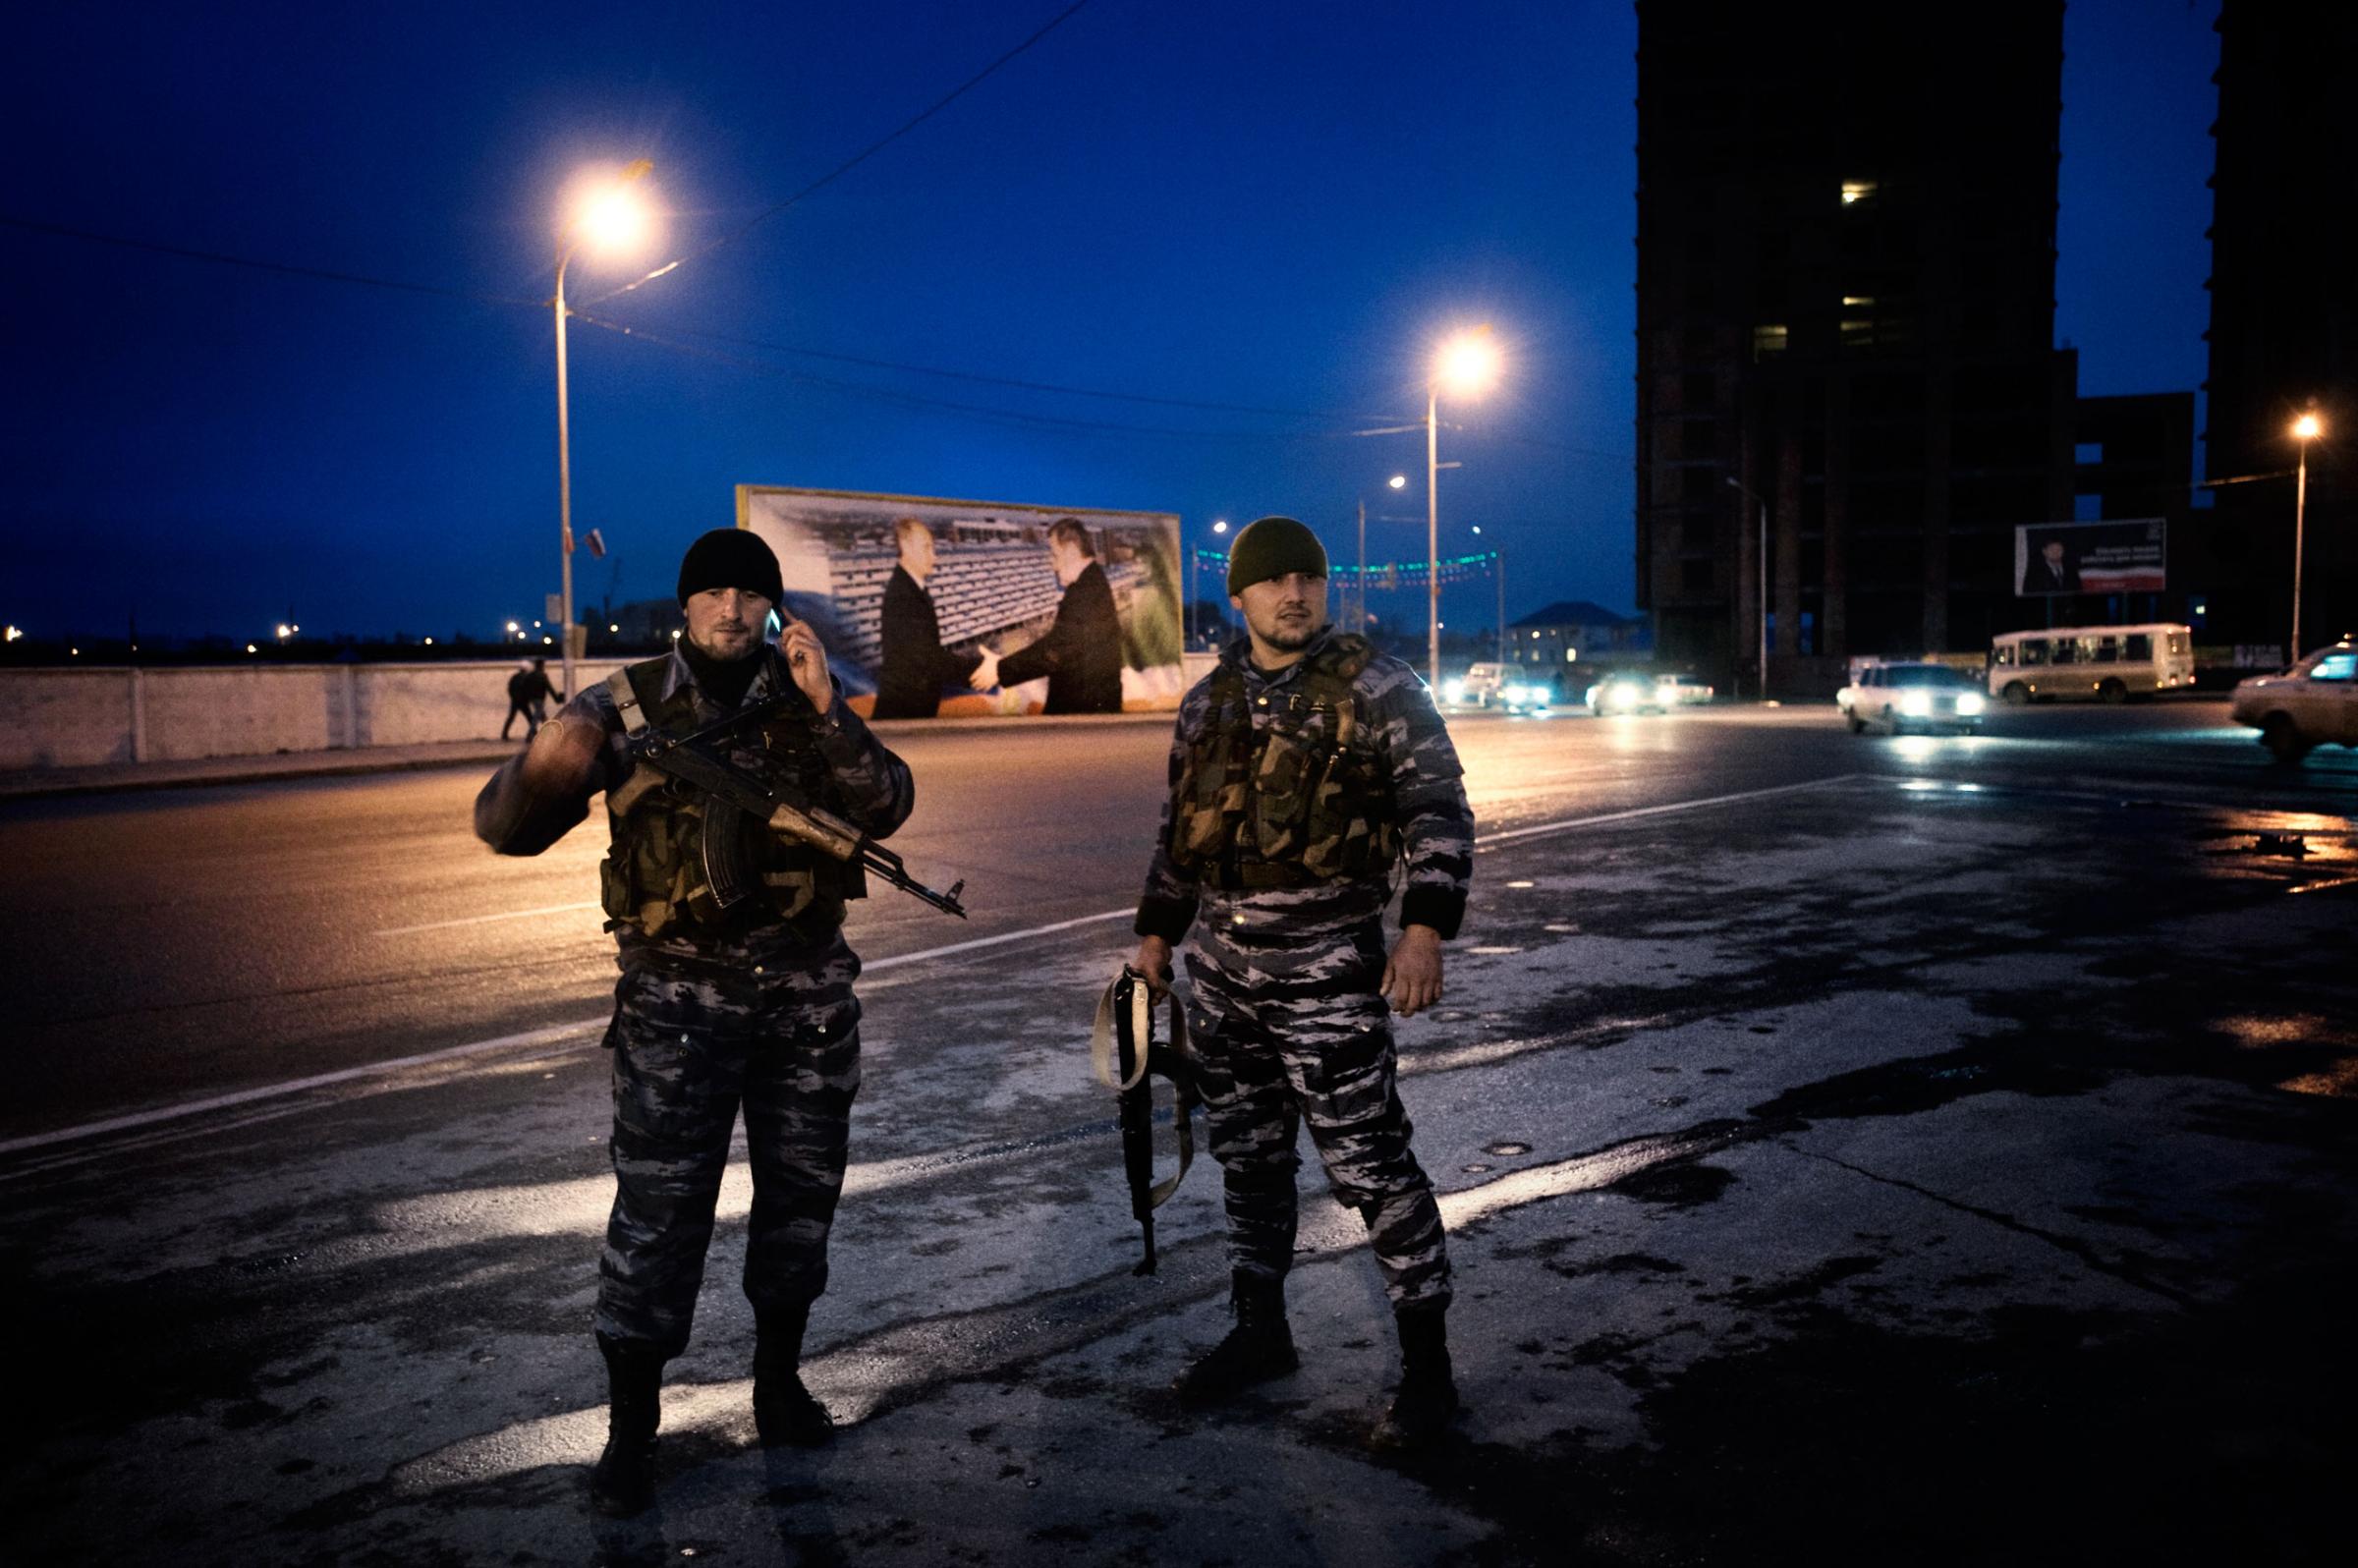 Chechen policemen, often targeted by rebels, guard a Grozny street with a billboard of Russian President Vladimir Putin and slain President Akhmad Kadyrov in the background, Nov. 2009.Yuri kozyrev—NOOR